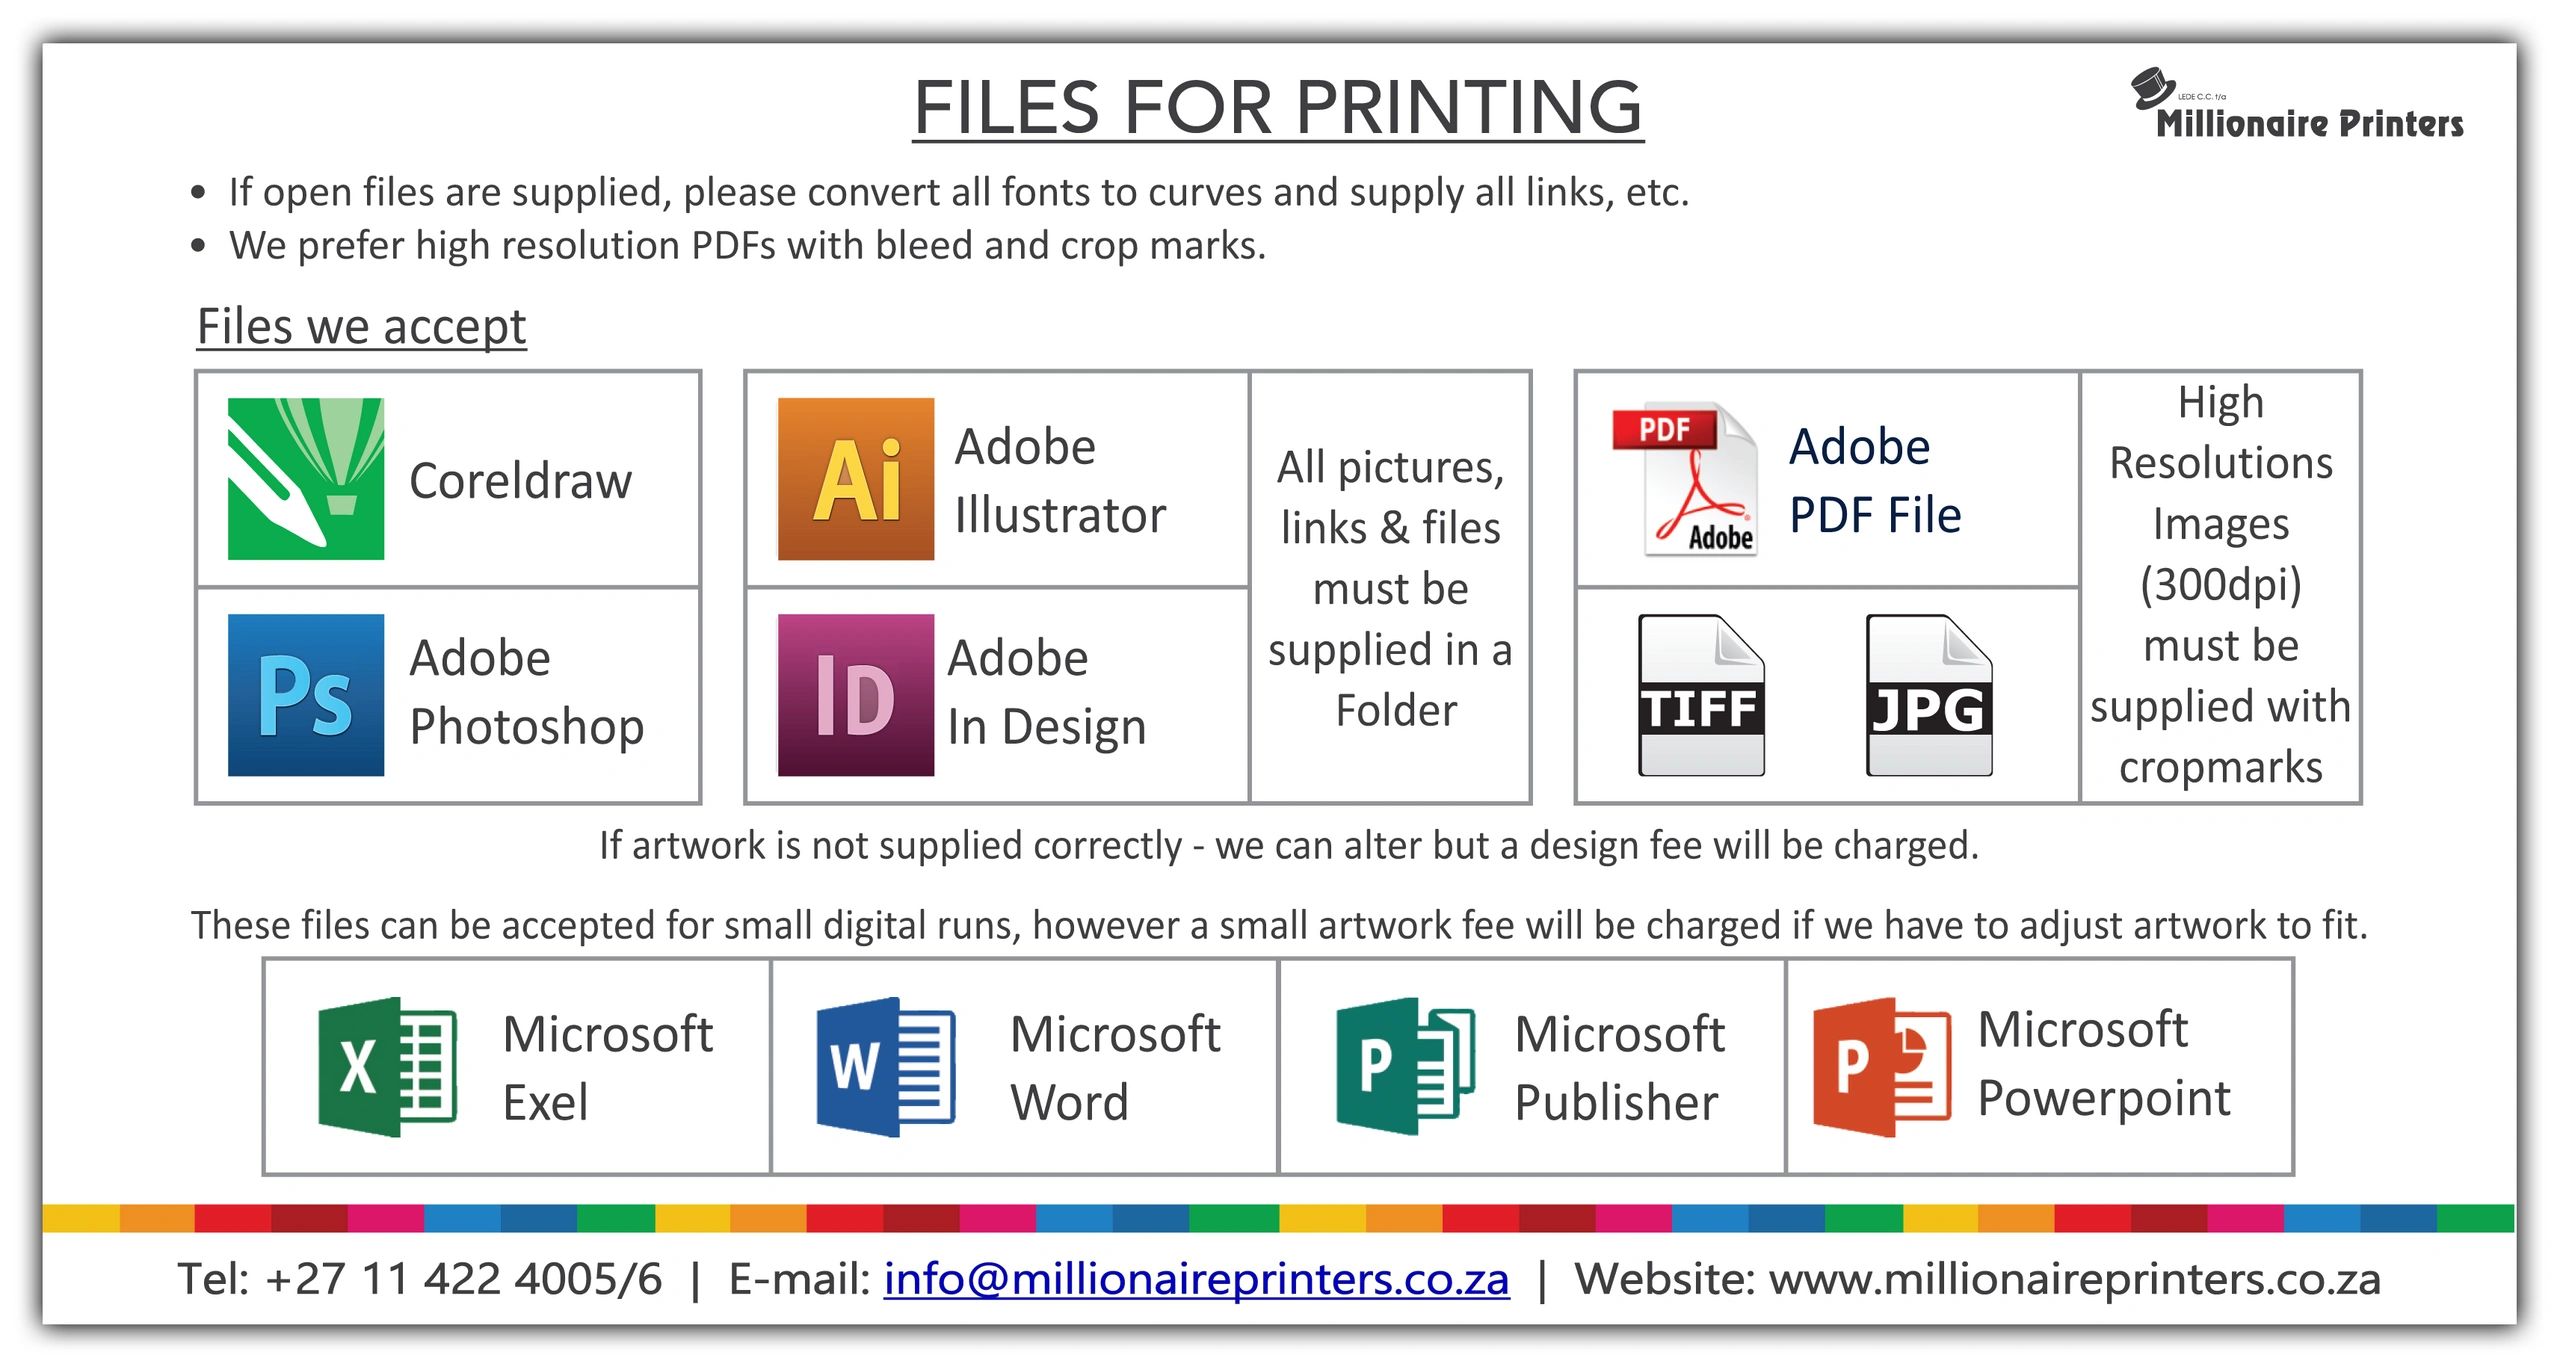 Useful facts and guidelines that should be followed when submitting artwork files for printing.